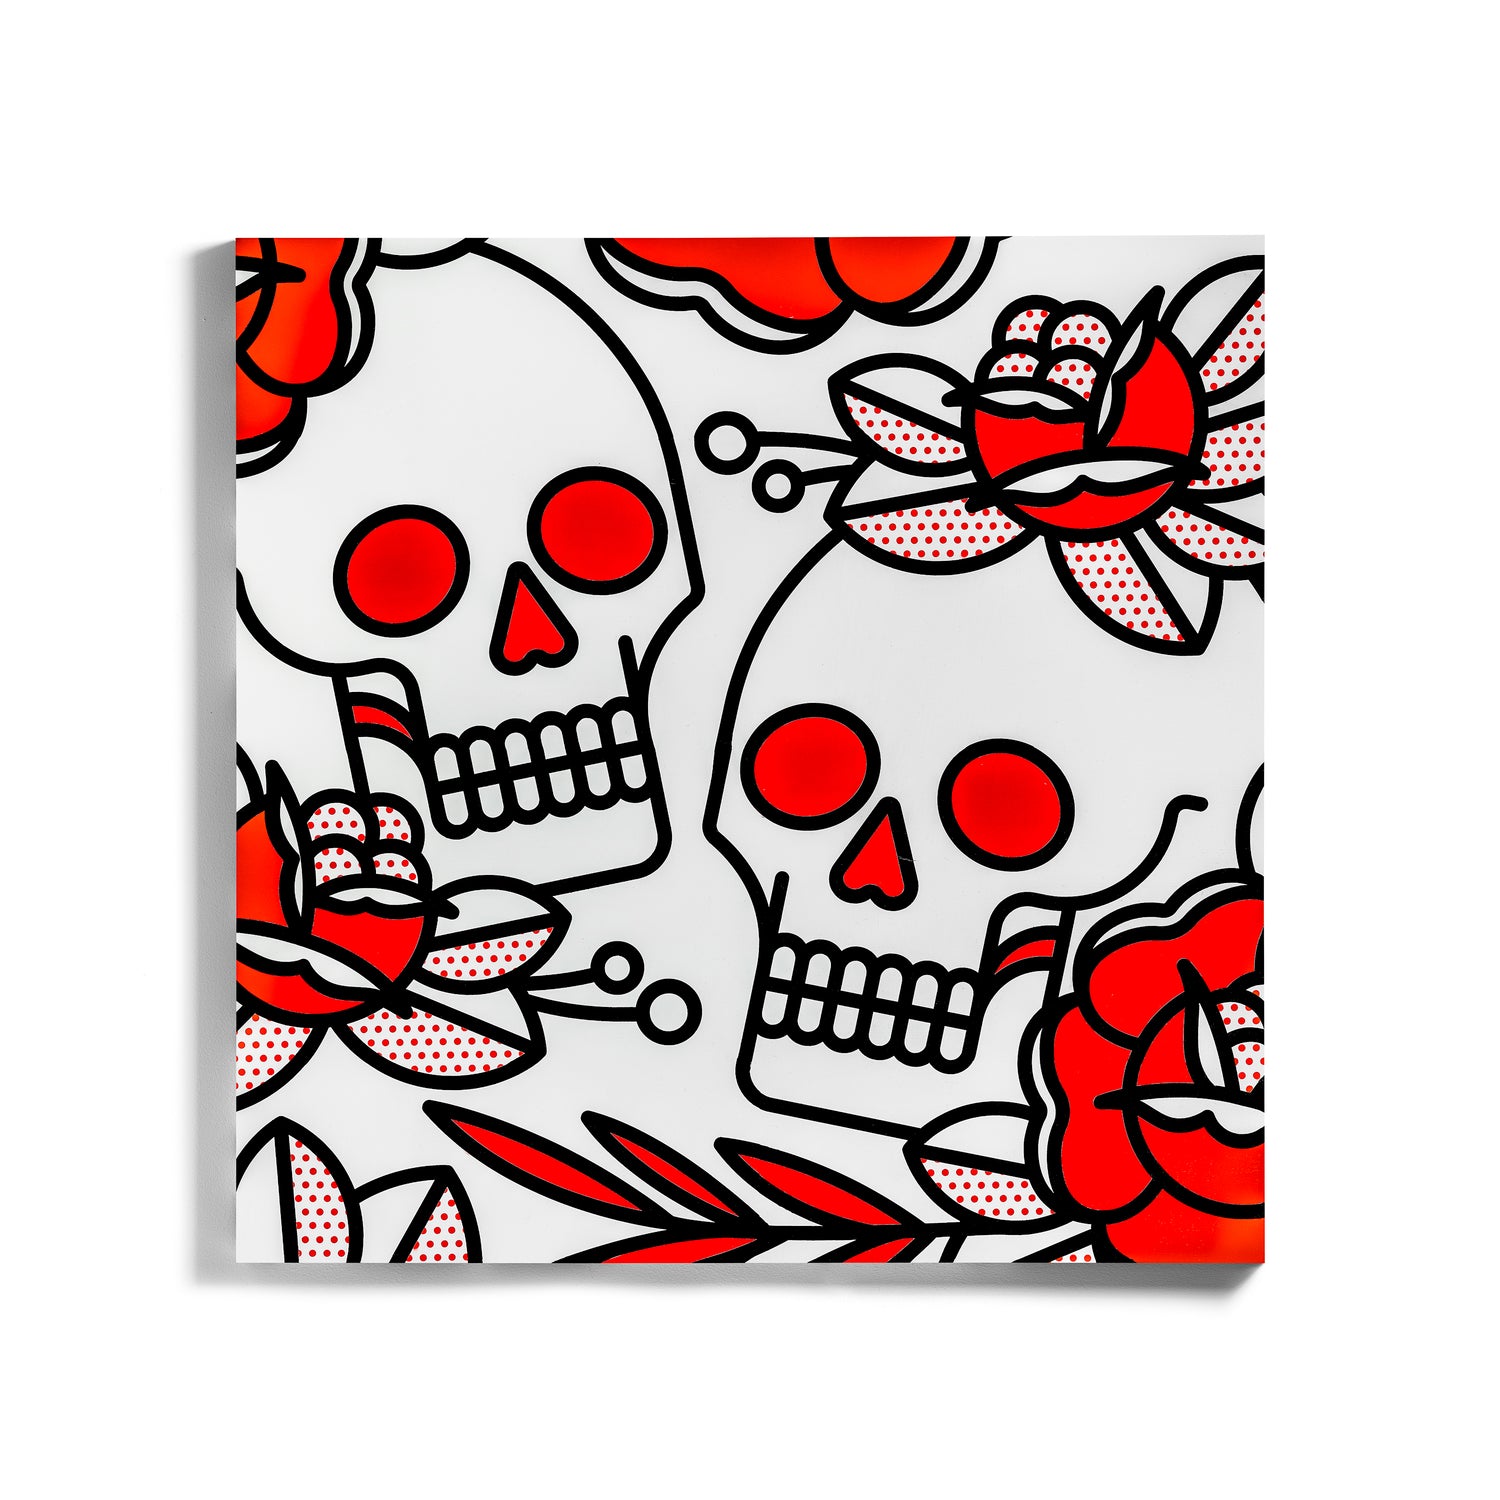 An original painting by the artist, Red Halftone. A 36x36” painting on a wood panel of two skulls facing one another with roses and foliage surrounding them. Painted in a monoline and popart fusion style using a white, black and red color palette.